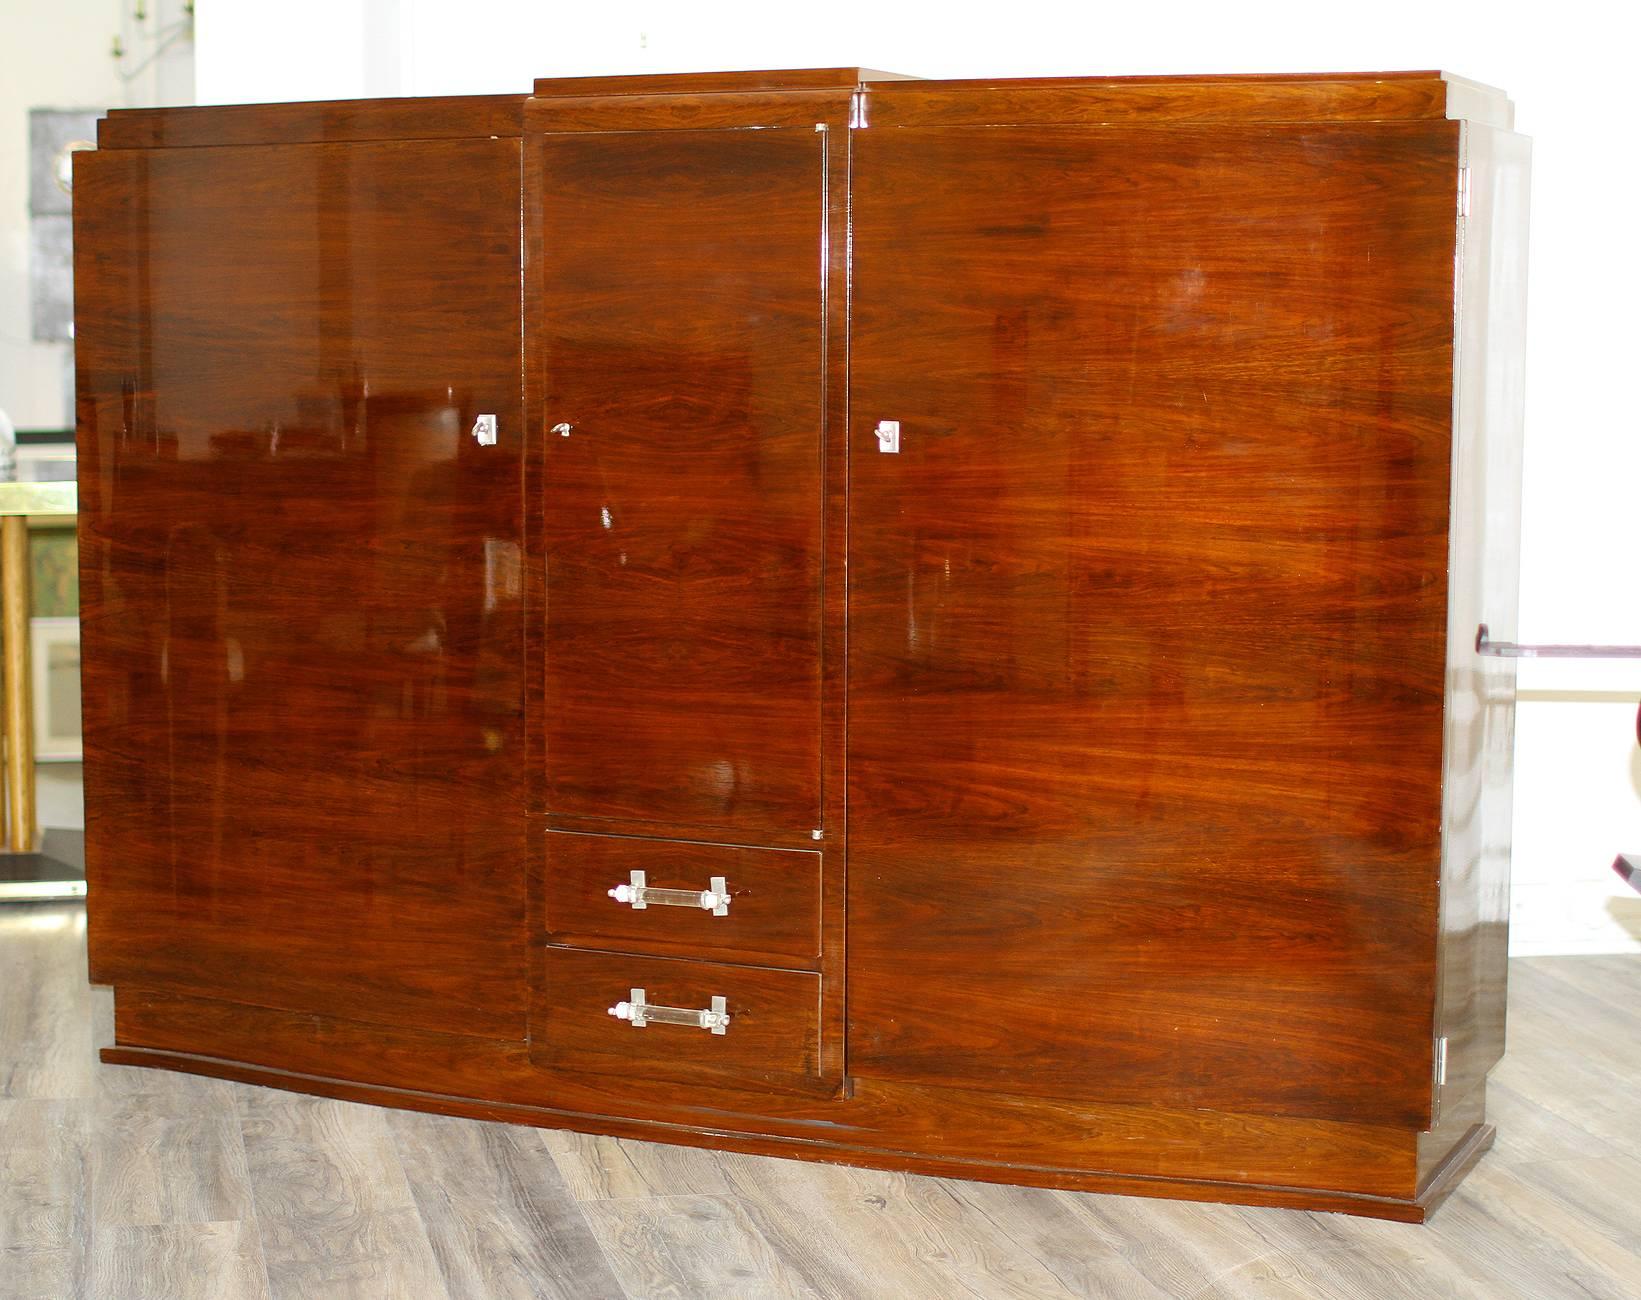 Jules Leleu,
Amazing cabinet in rosewood veneer, France, circa 1930
Three doors and two drawers
Nickel-plated bronze hardware, and handles in glass.
Excellent condition, refinished.
Note: This cabinet is consigned from one of our clients who want to